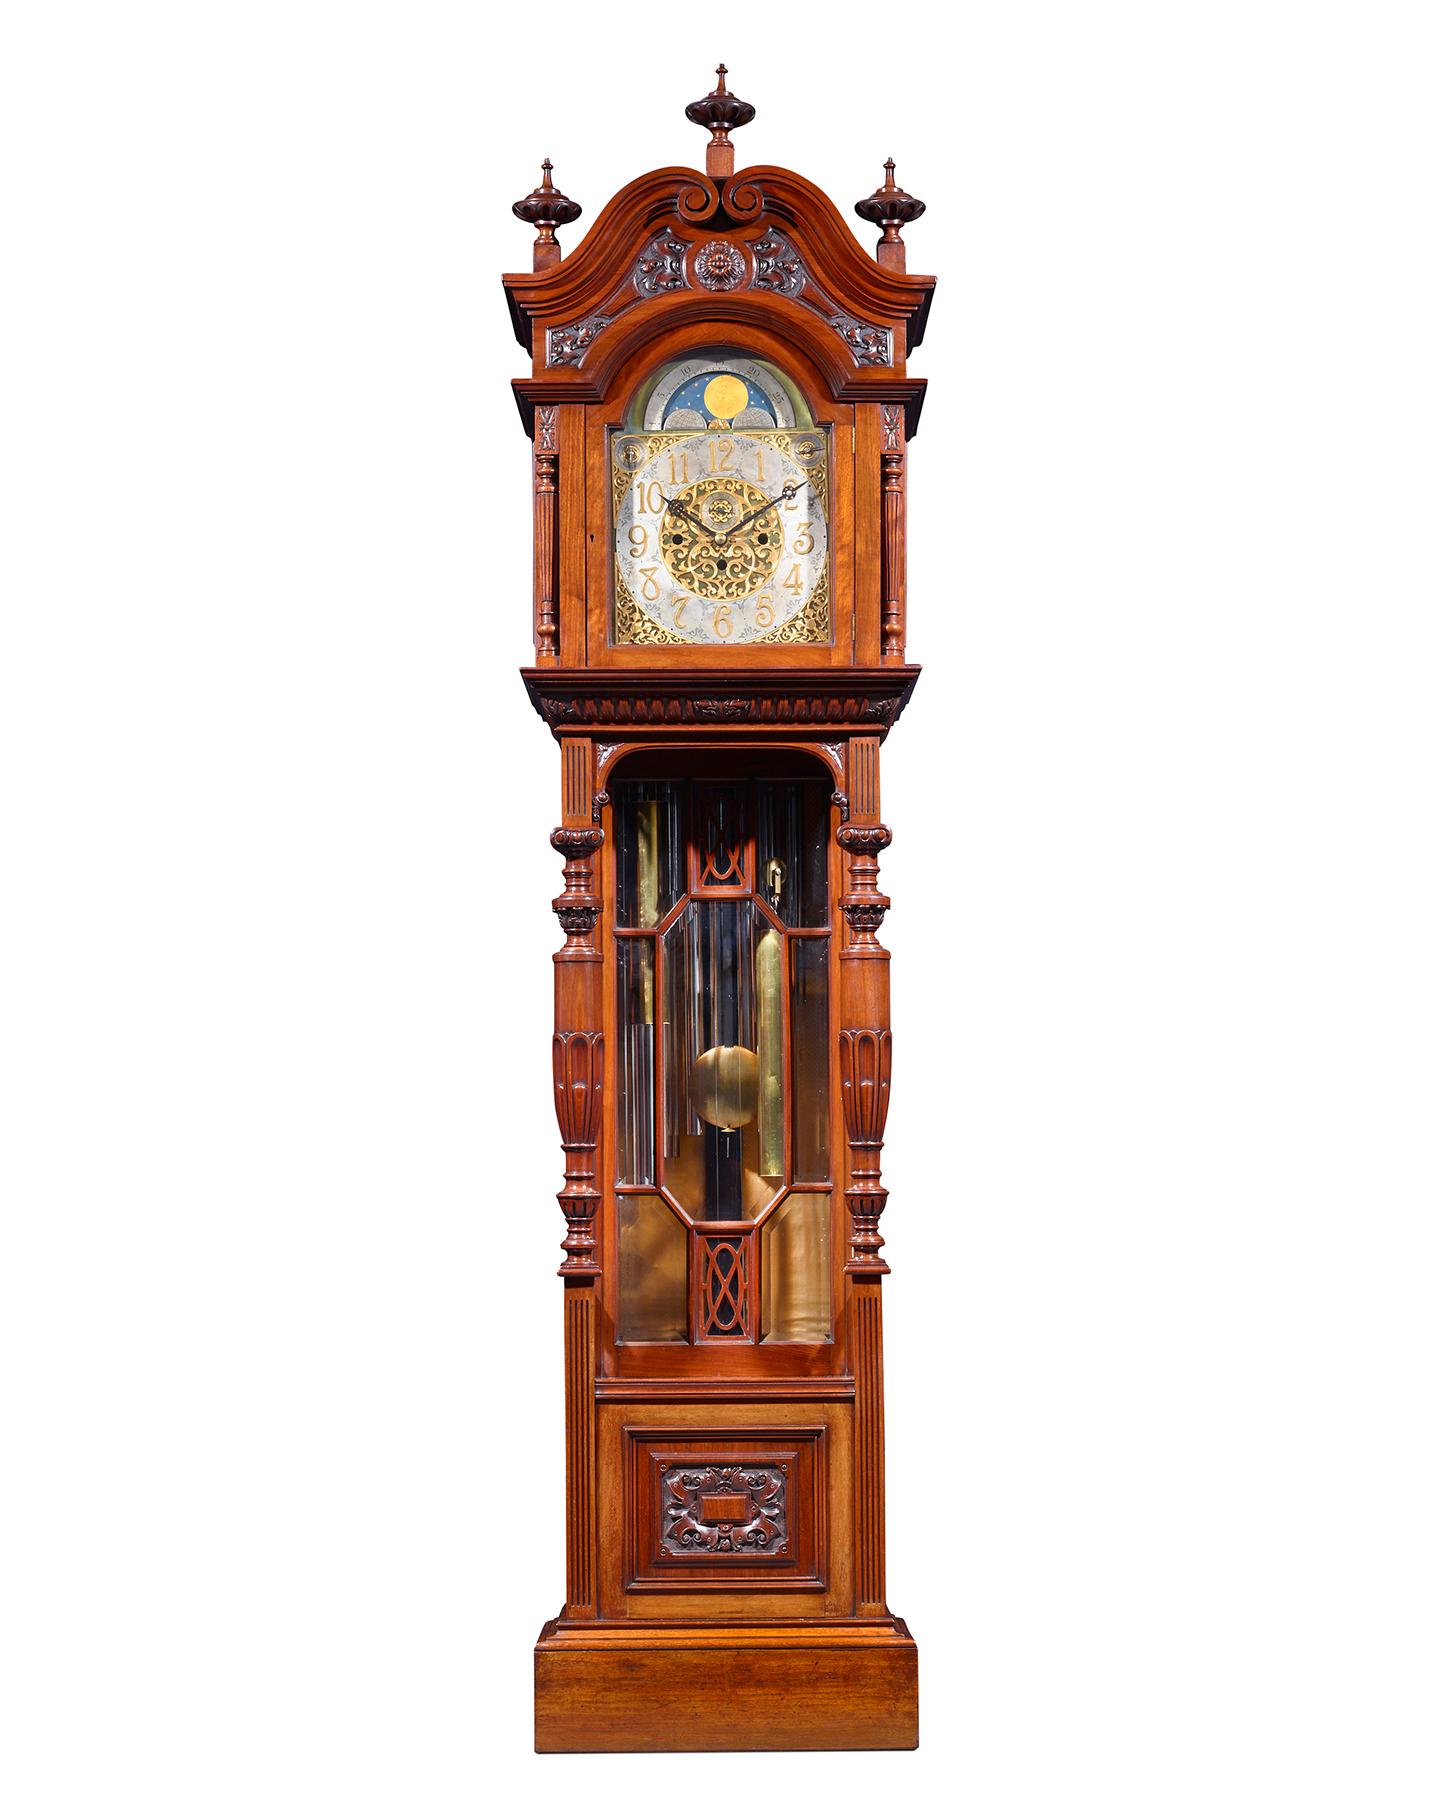 An exceptional example of Victorian clock making, this imposing tall case, or grandfather, clock towers in a masterfully carved mahogany case. A complex eight-day movement powers the clock, which features nine tubular bells inside that chime the